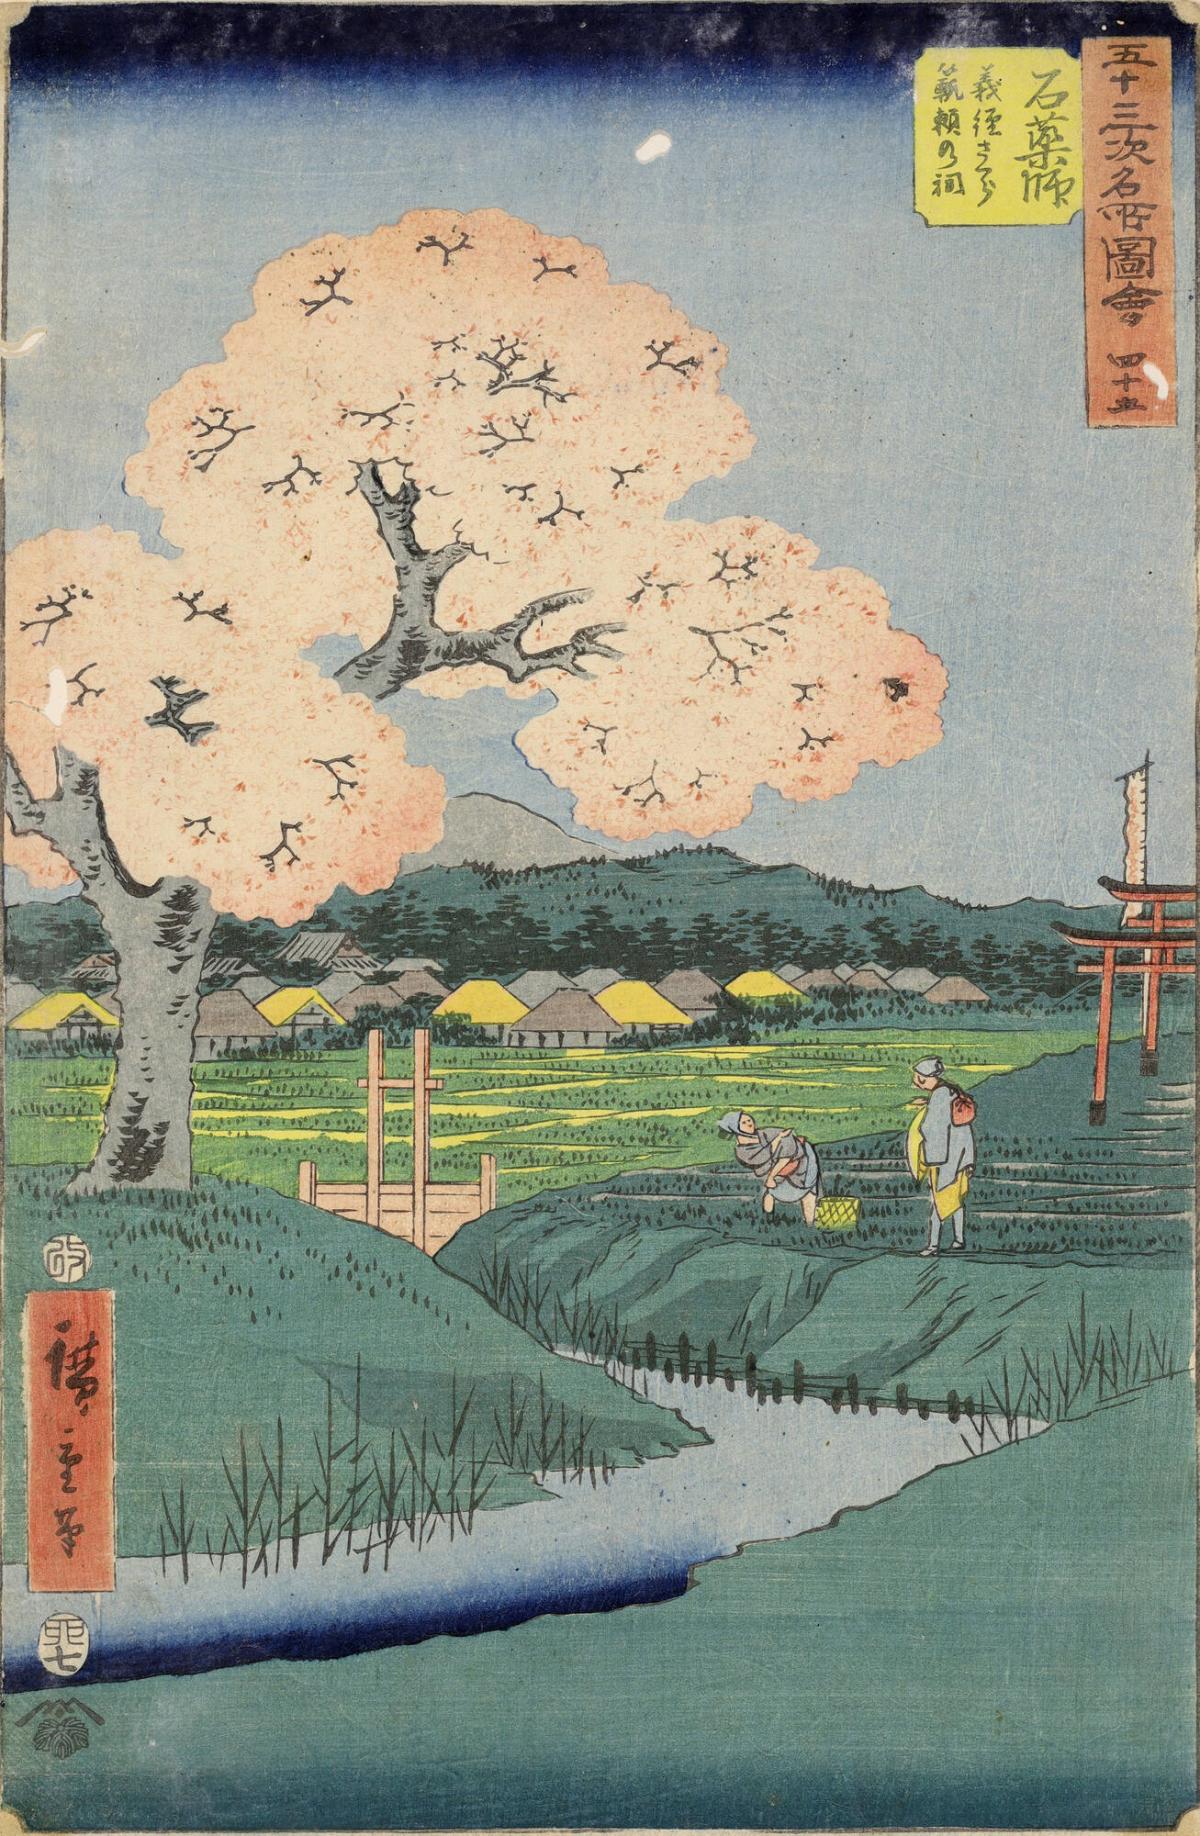 Yoshitsune's Cherry Tree and the Shrine to Noriyori at Ishiyakushi, no. 45 from the series Pictures of Famous Places of the Fifty-three Stations, the Vertical Tōkaidō